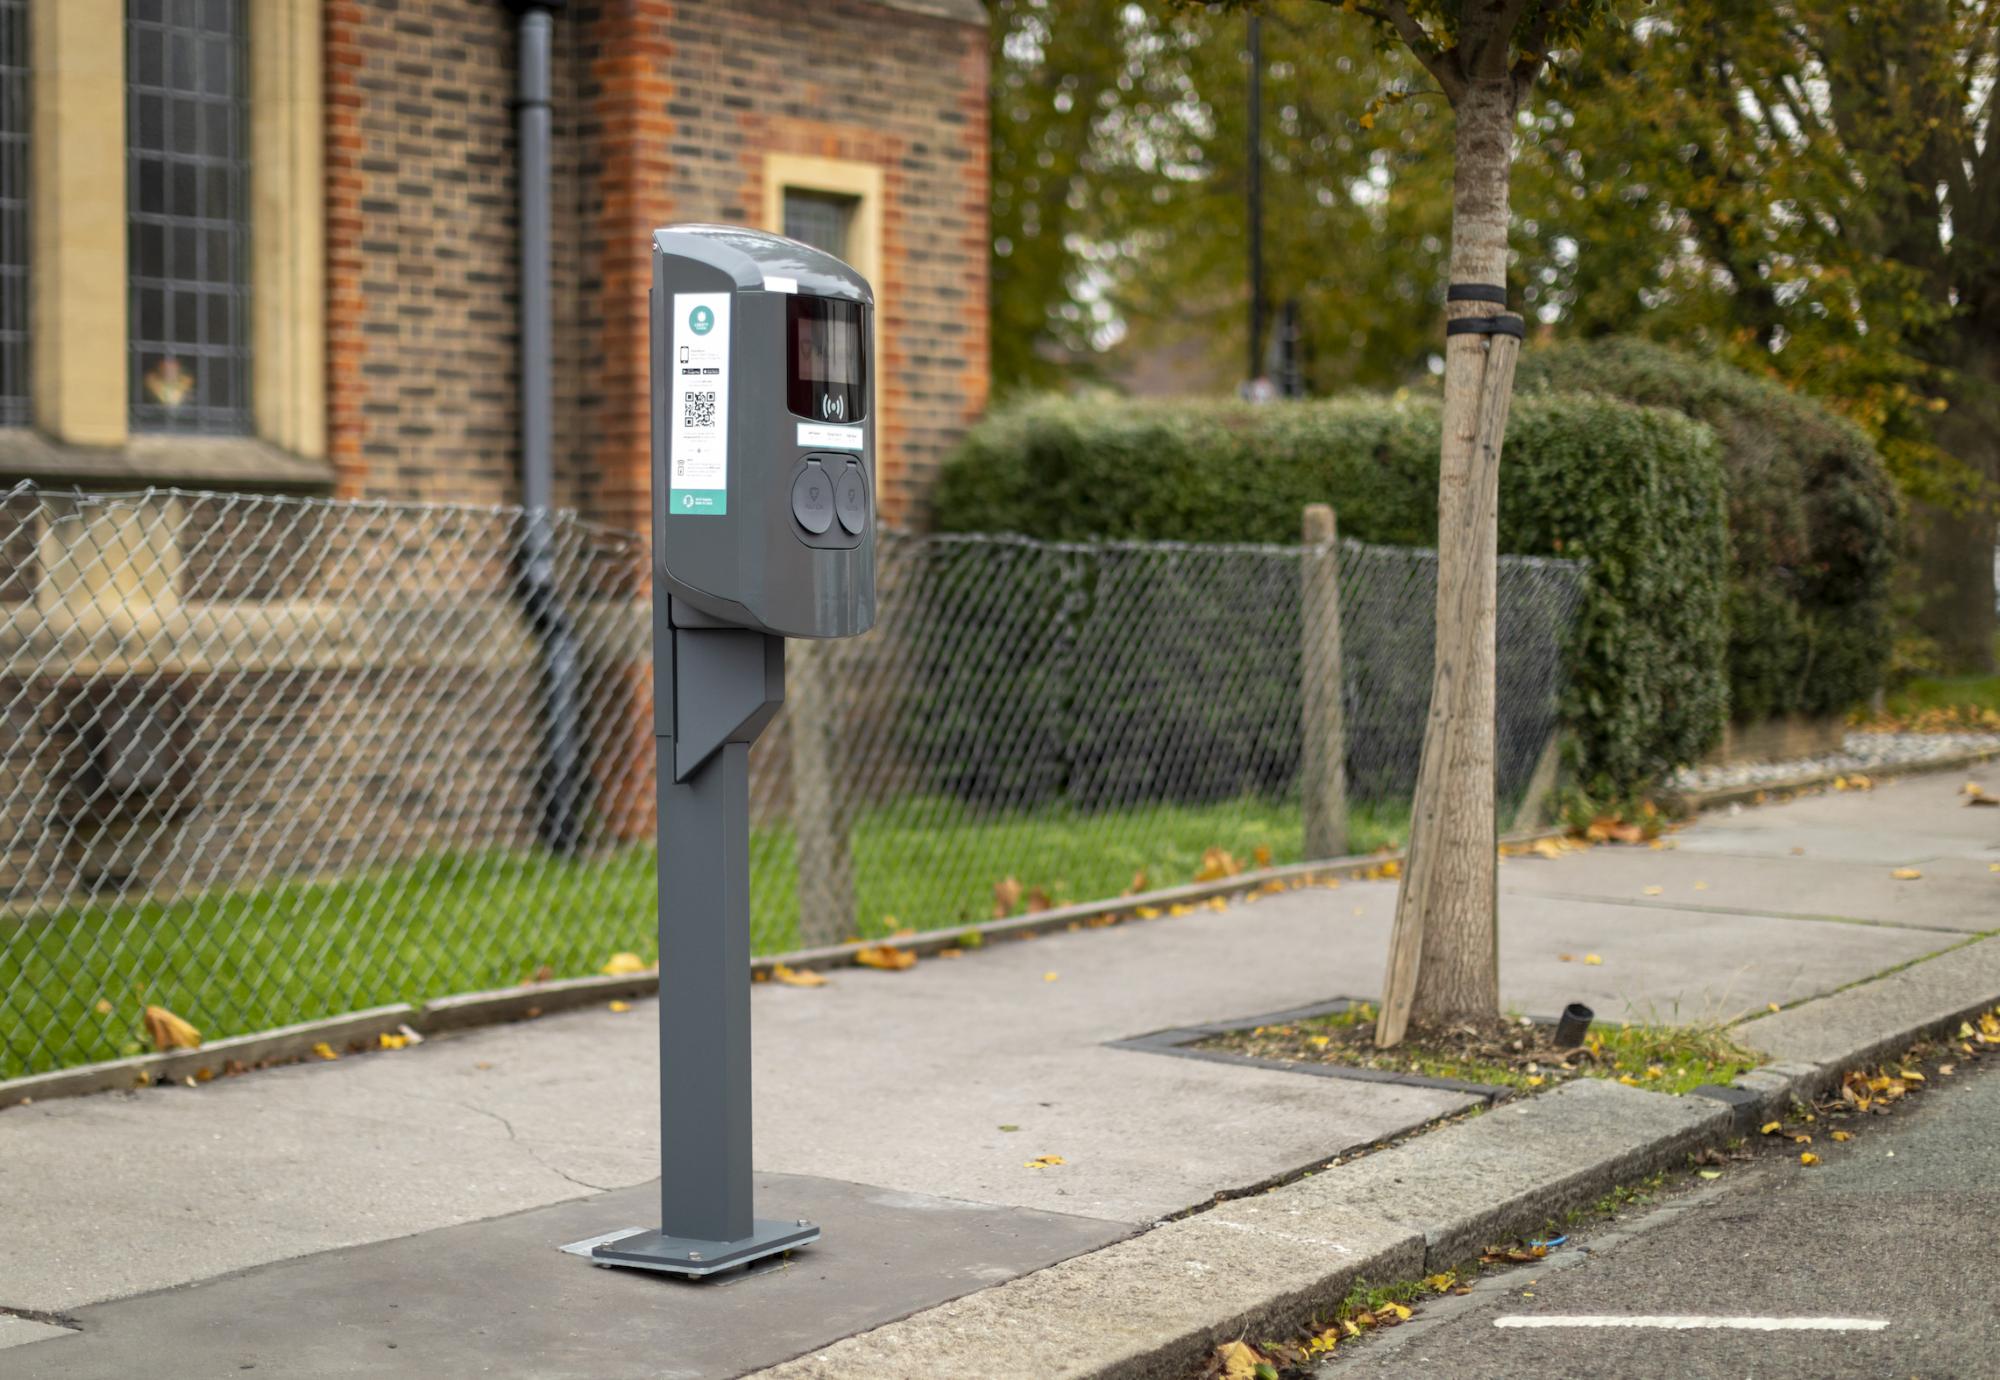 Liberty Charge electric vehicle charging point on the street